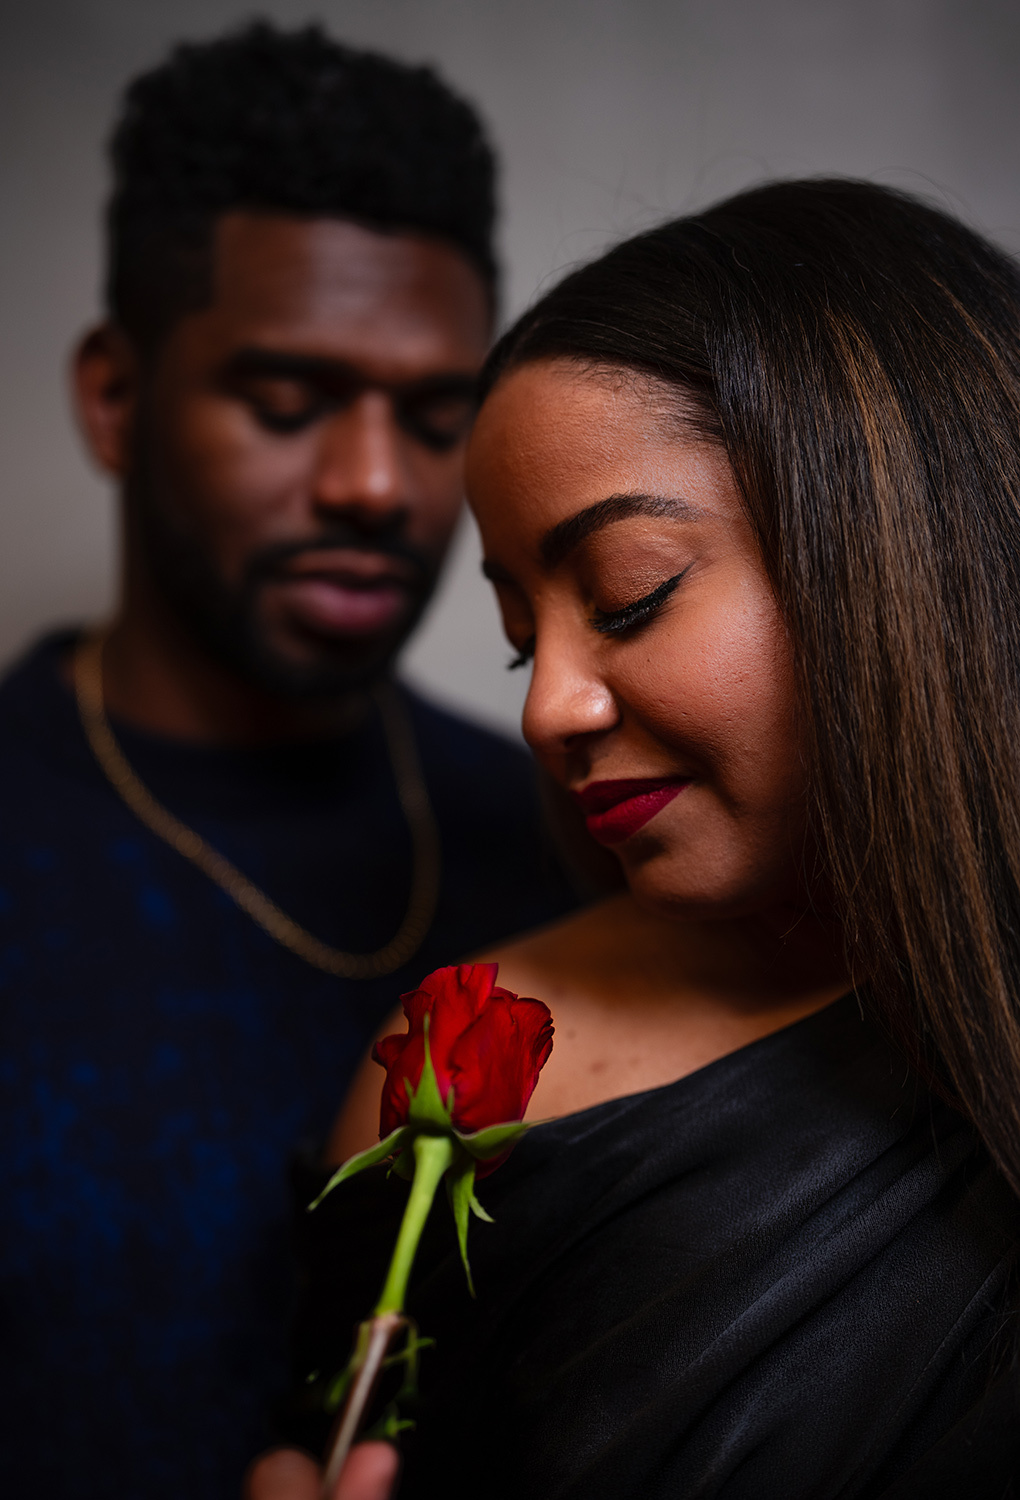 Man behind a woman who holds a rose, both looking down, conveying intimacy and romance